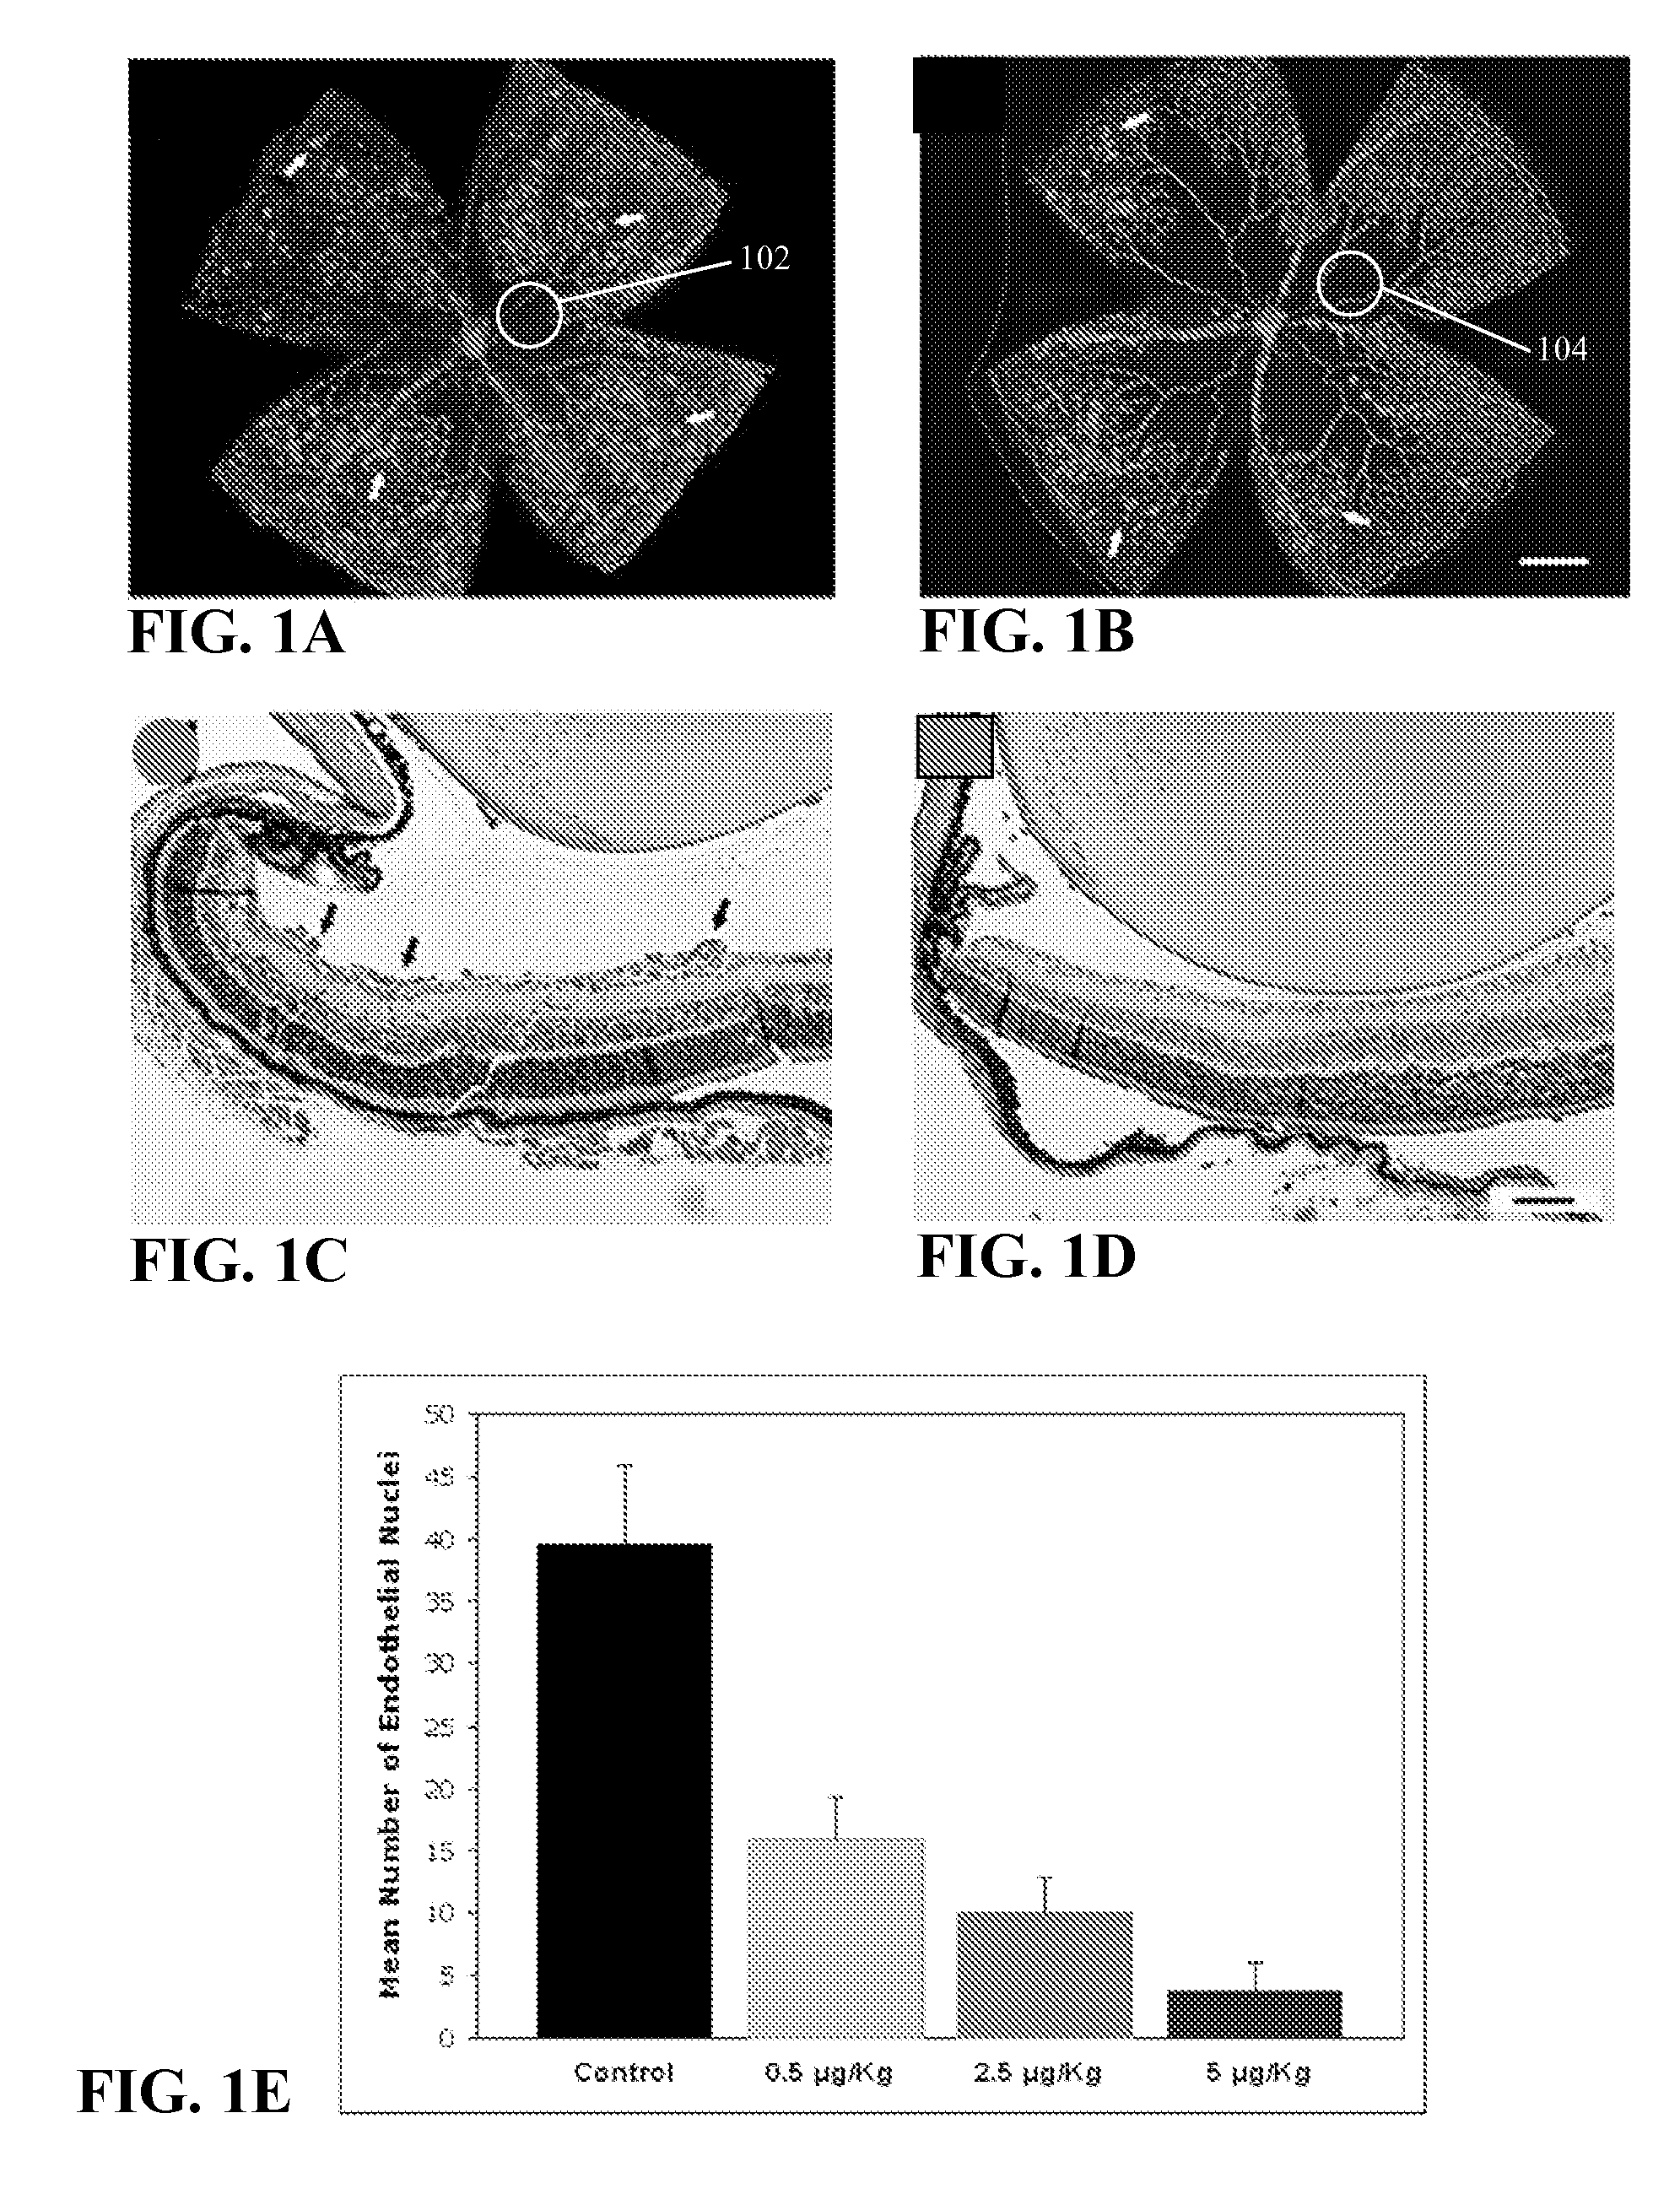 Method of using calcitriol for treating intraocular diseases associated with angiogenesis